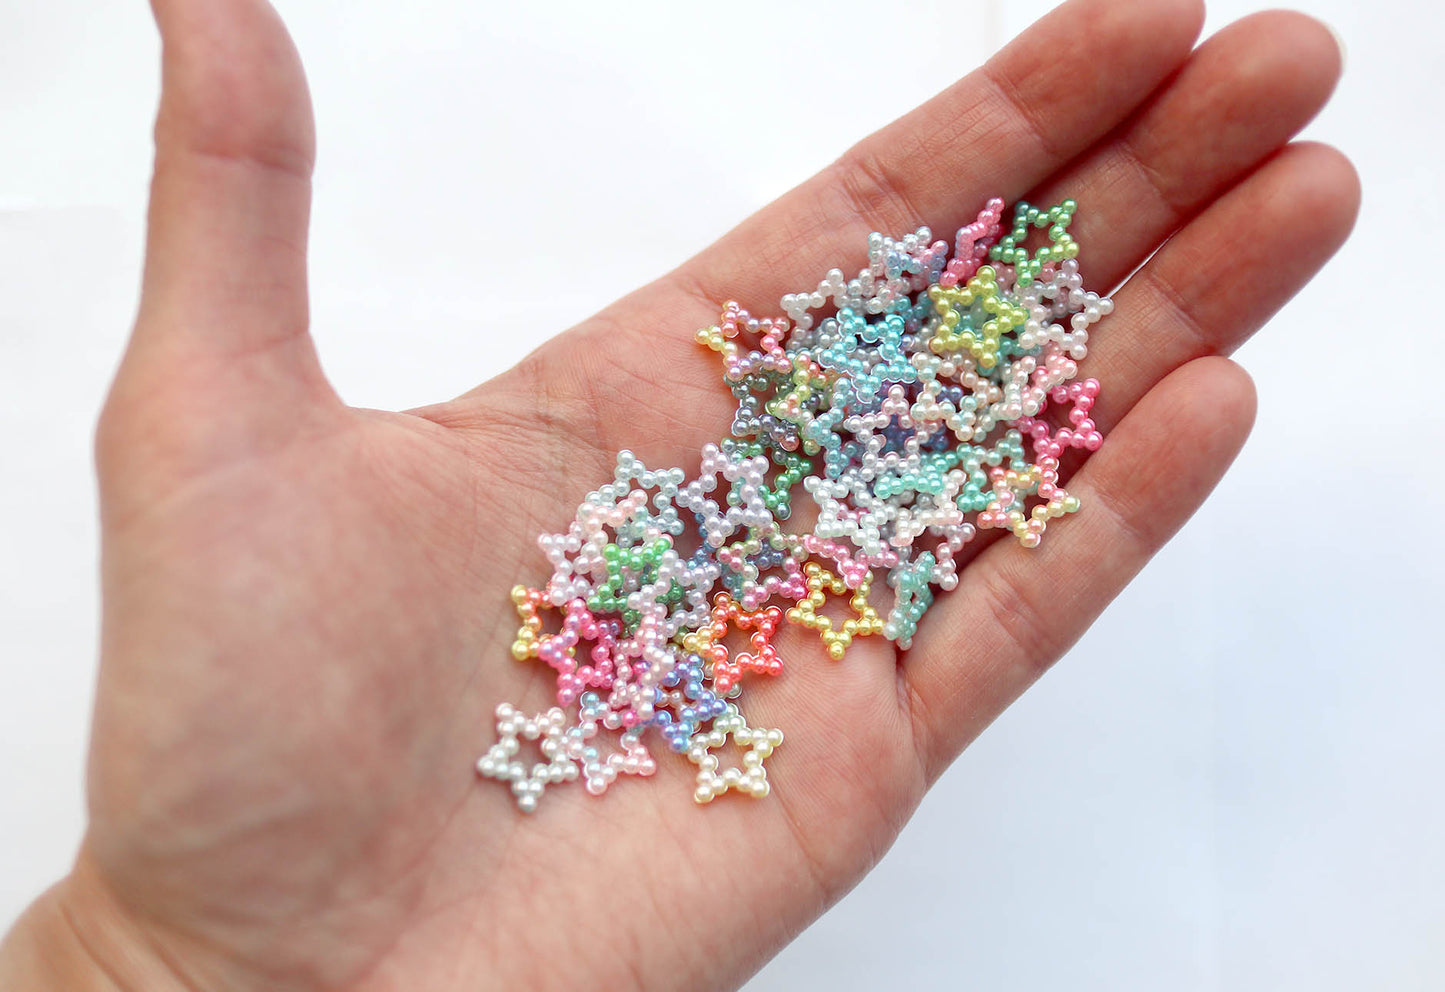 Pastel Star Cabochons - 12mm Small Pearly Pastel Star Flatbacks ABS Plastic Resin or Acrylic Cabochons - 18g (Approx 200 pcs)